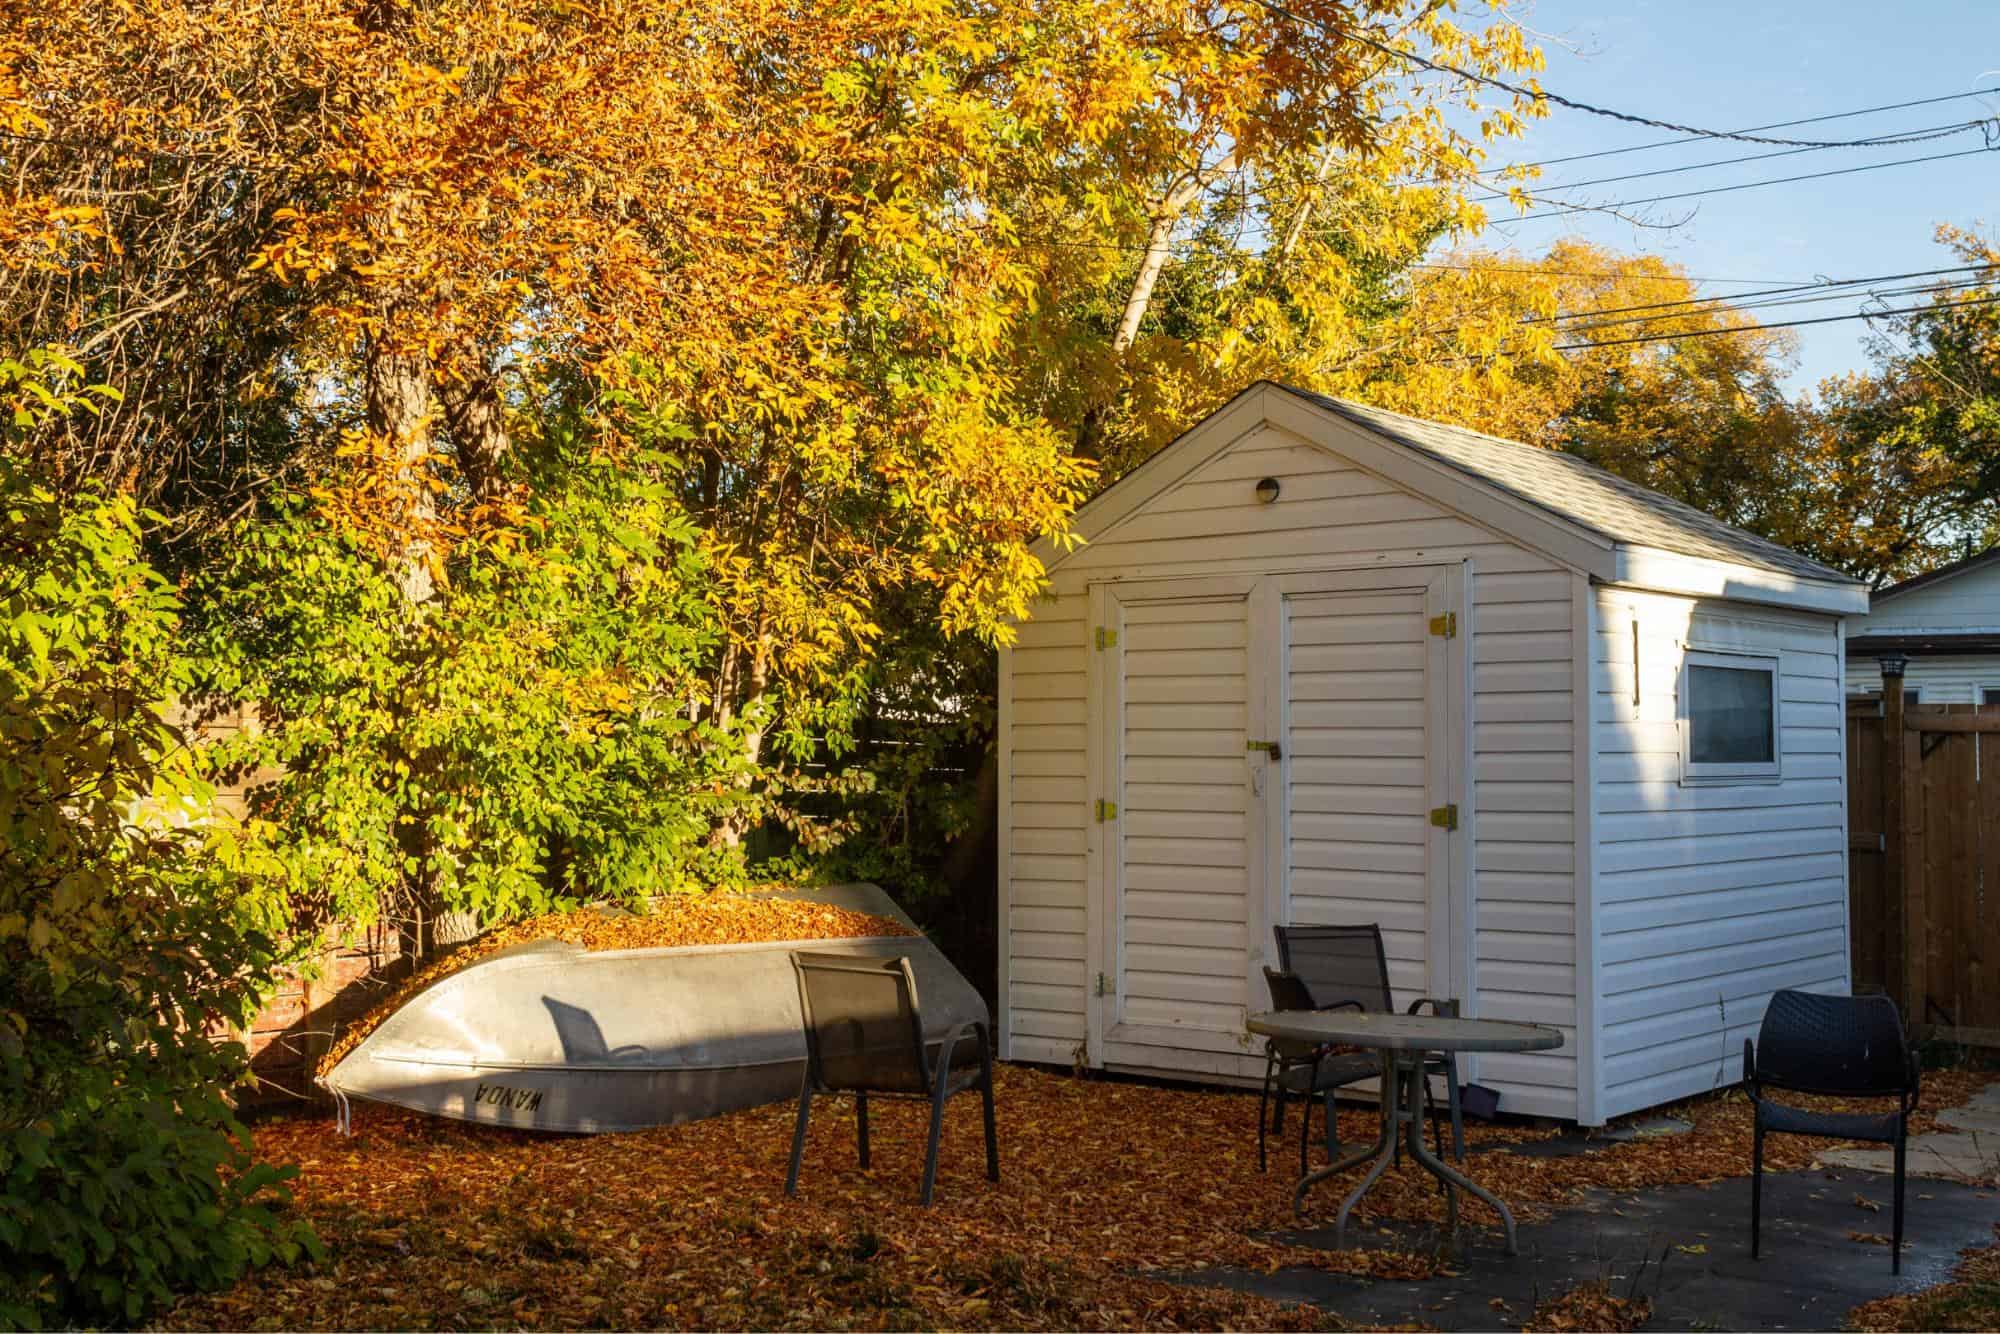 budget friendly shed/man cave ideas in a backyard in autumn